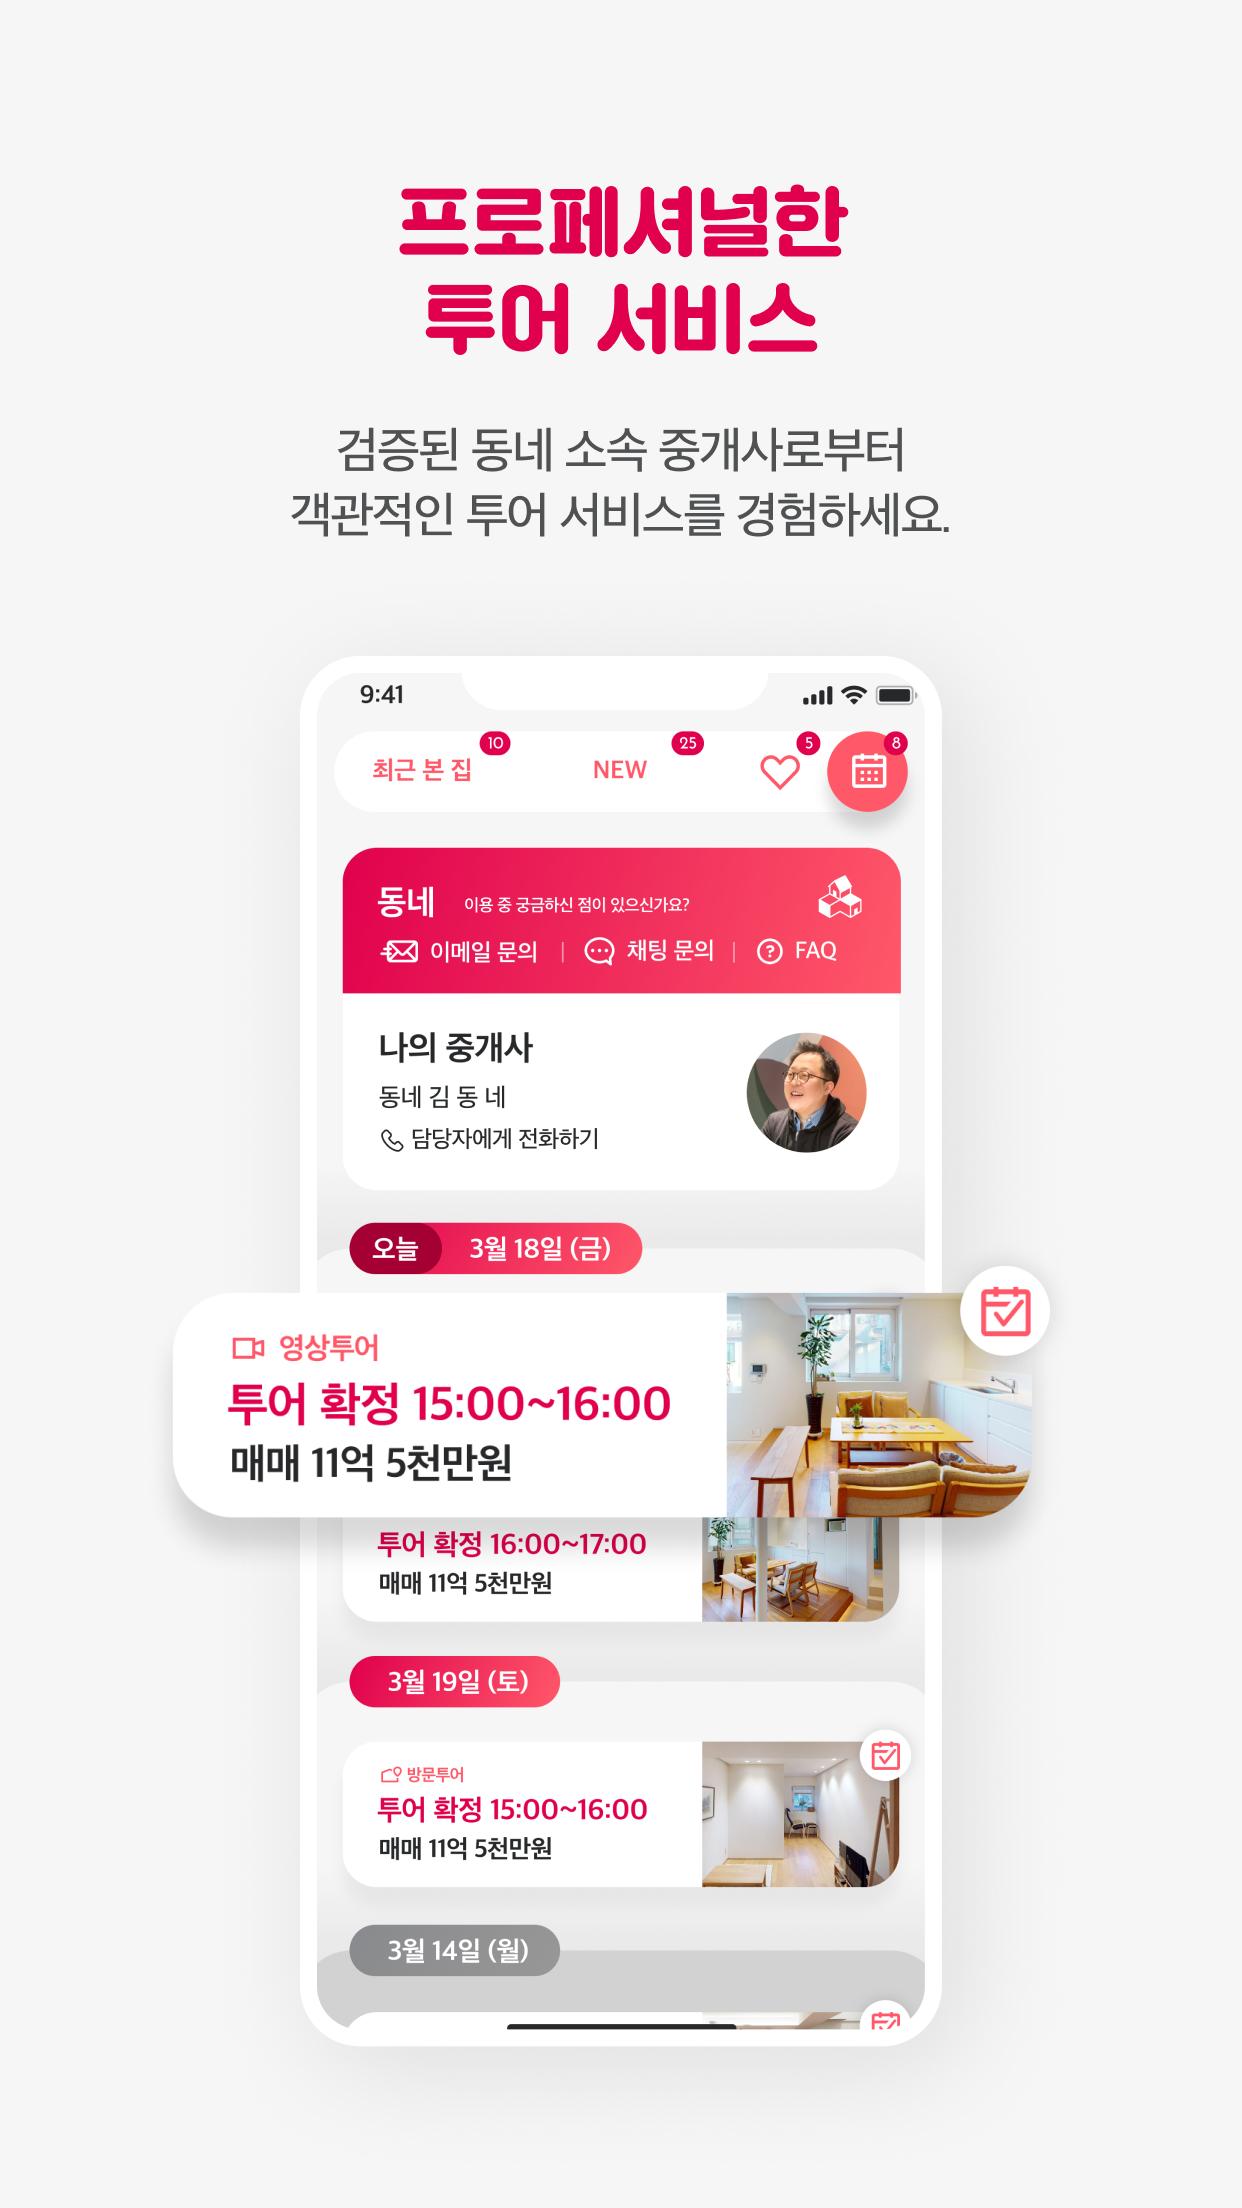 Dongnae Real Estate: Find Your Home 1.0.2 Screenshot 15